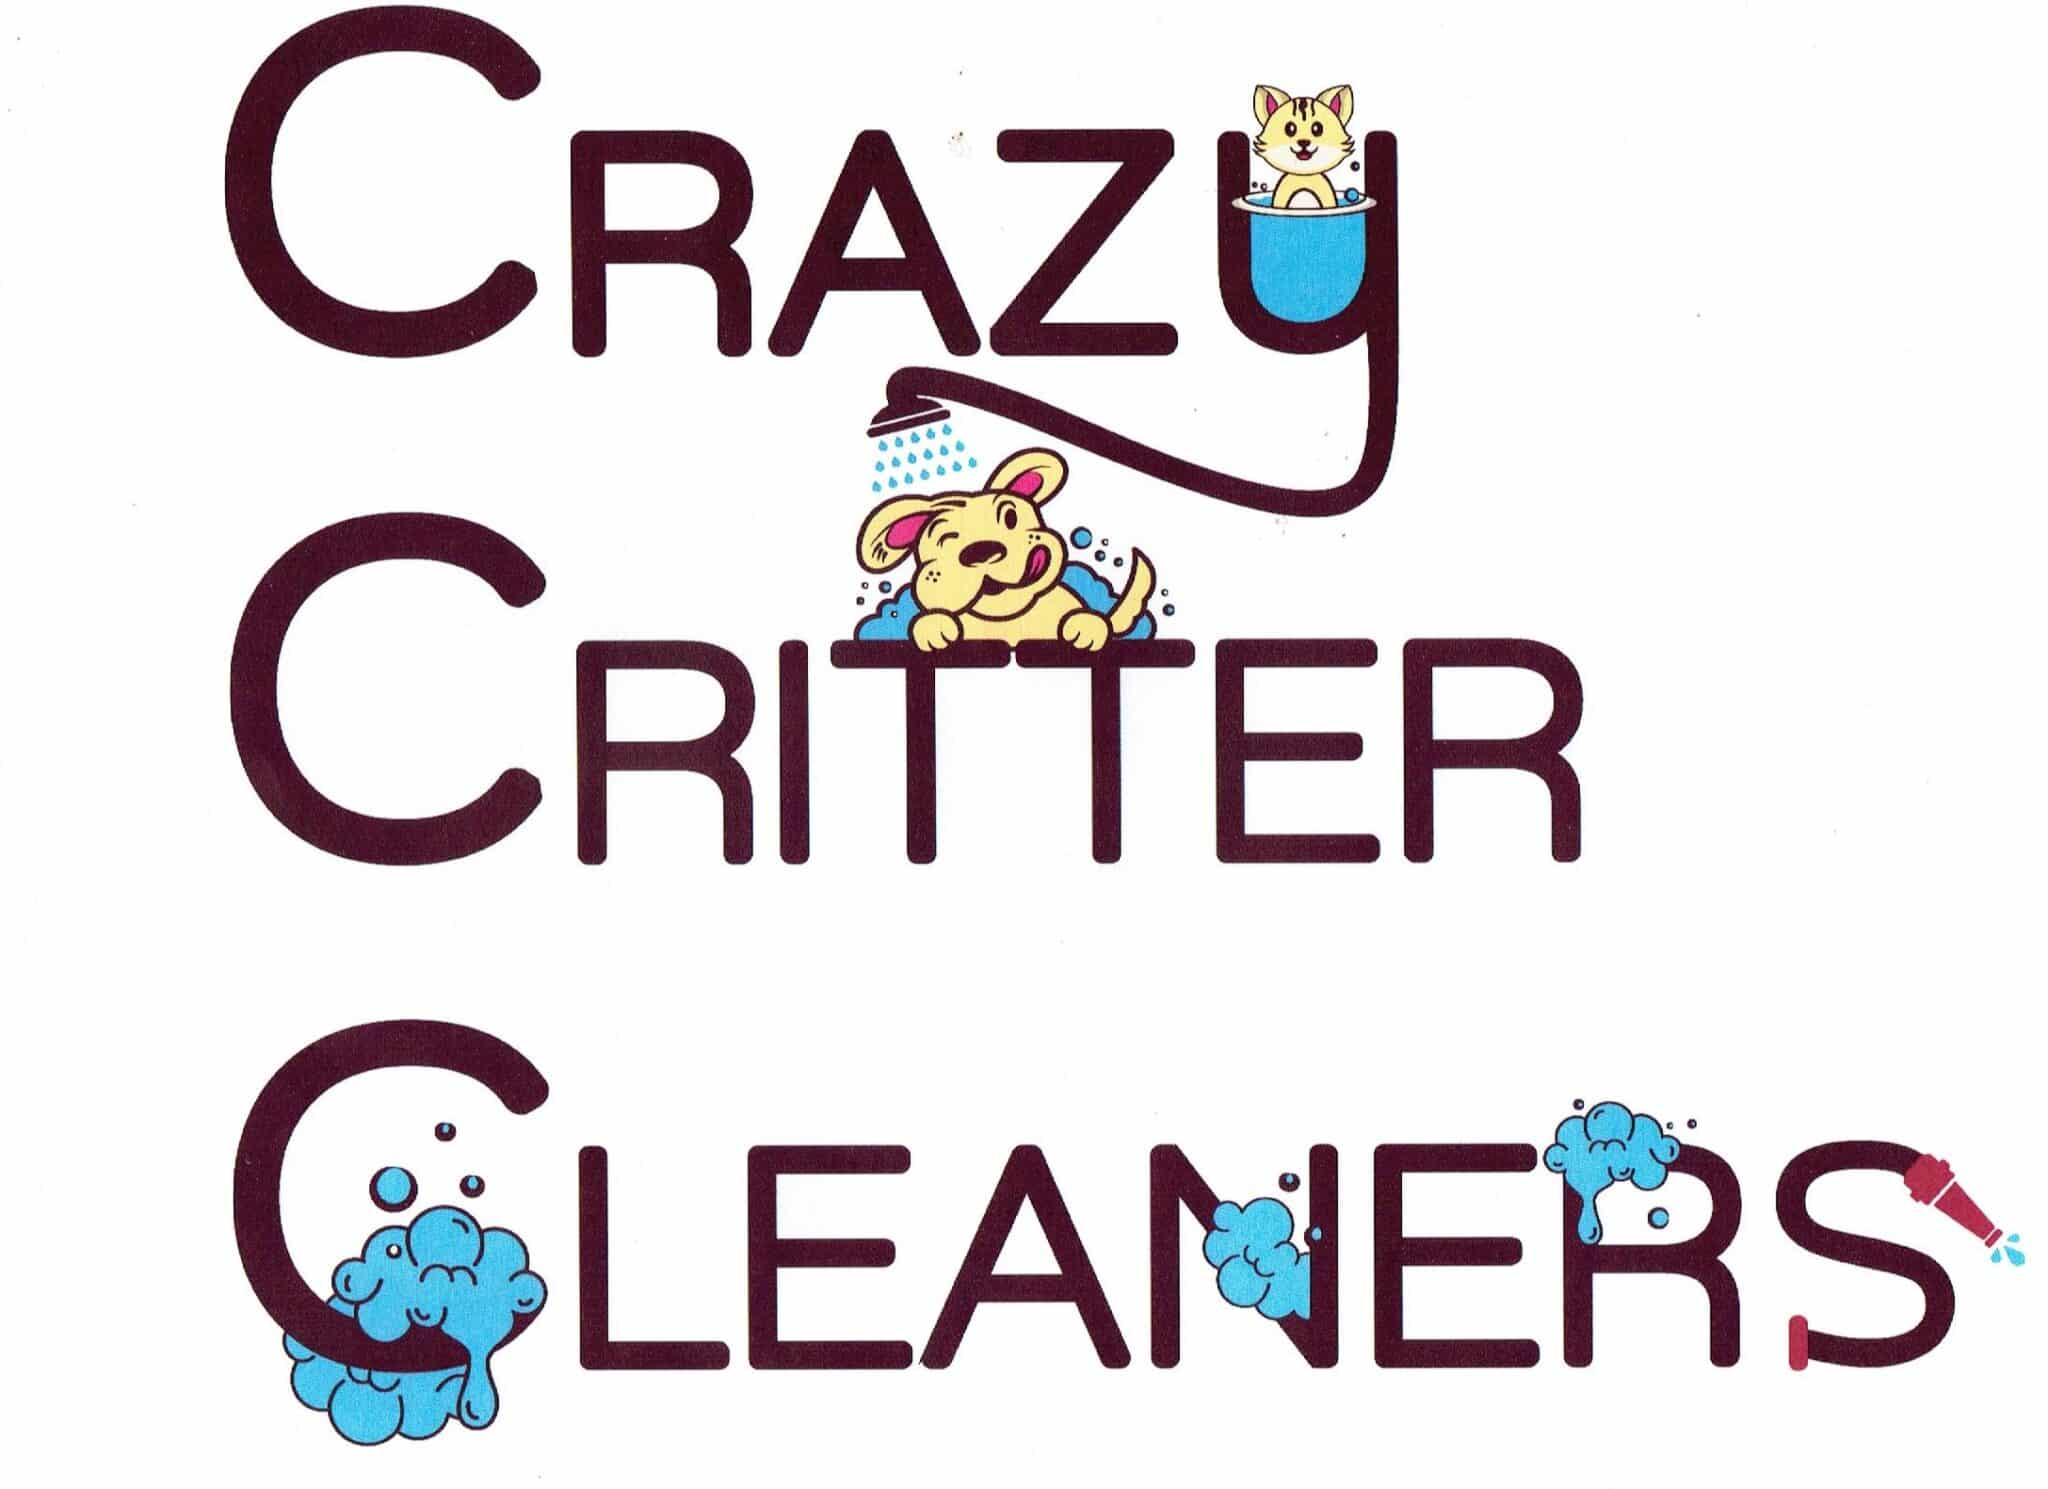 Crazy Critter Cleaners